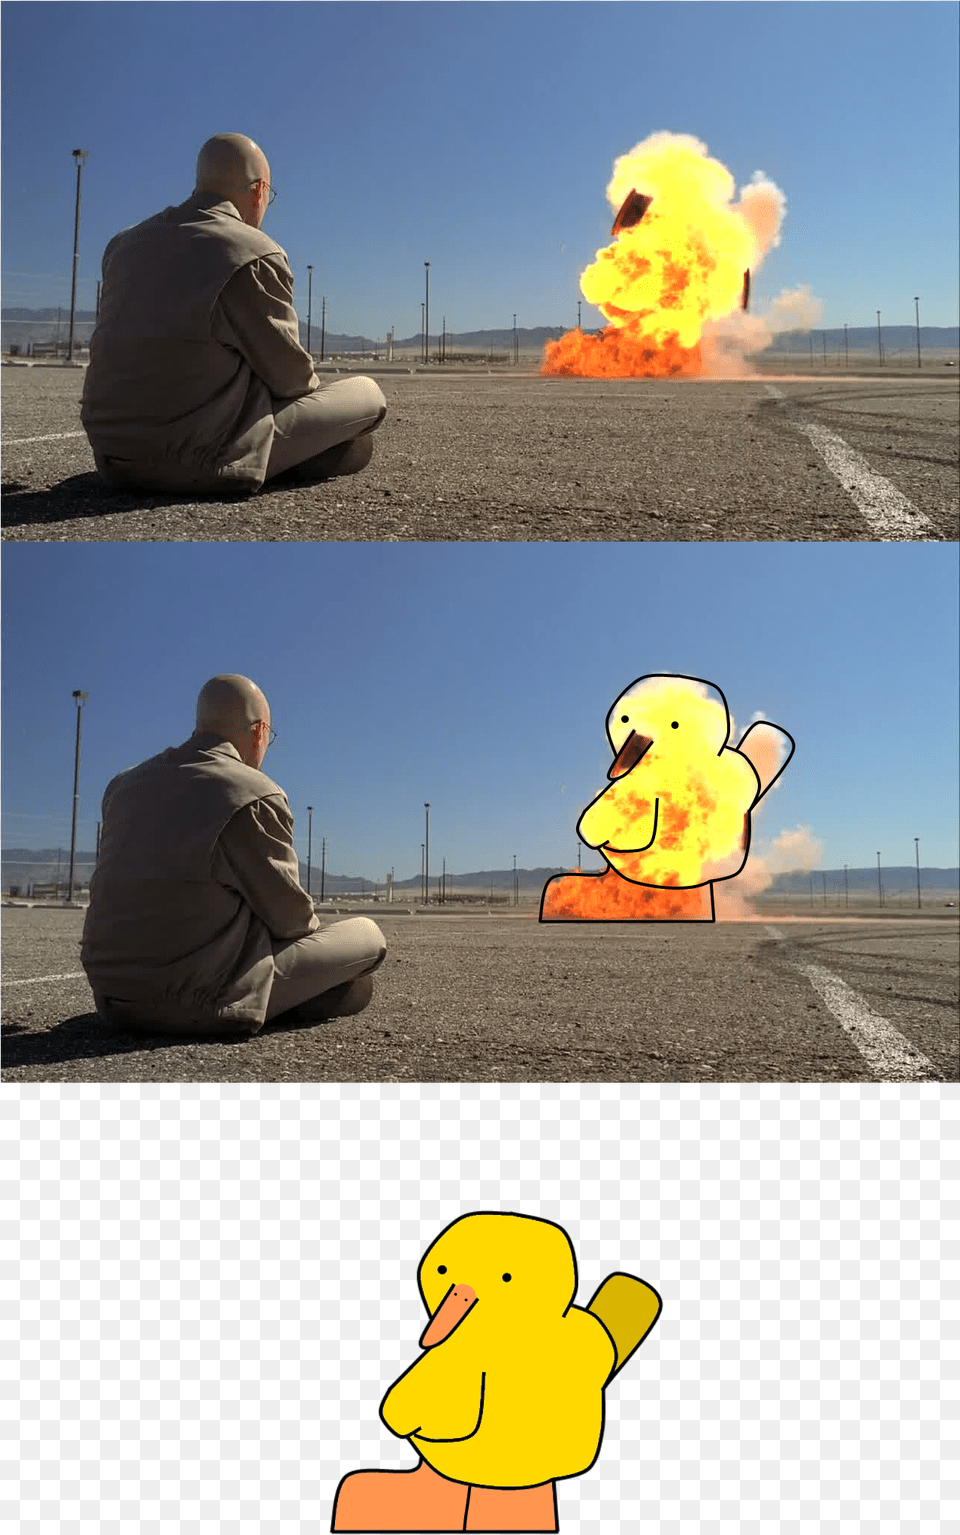 Walter White Saul Goodman Yellow Water Bird Ducks Geese Cool Men Dont Look At Explosions, Adult, Male, Man, Person Free Png